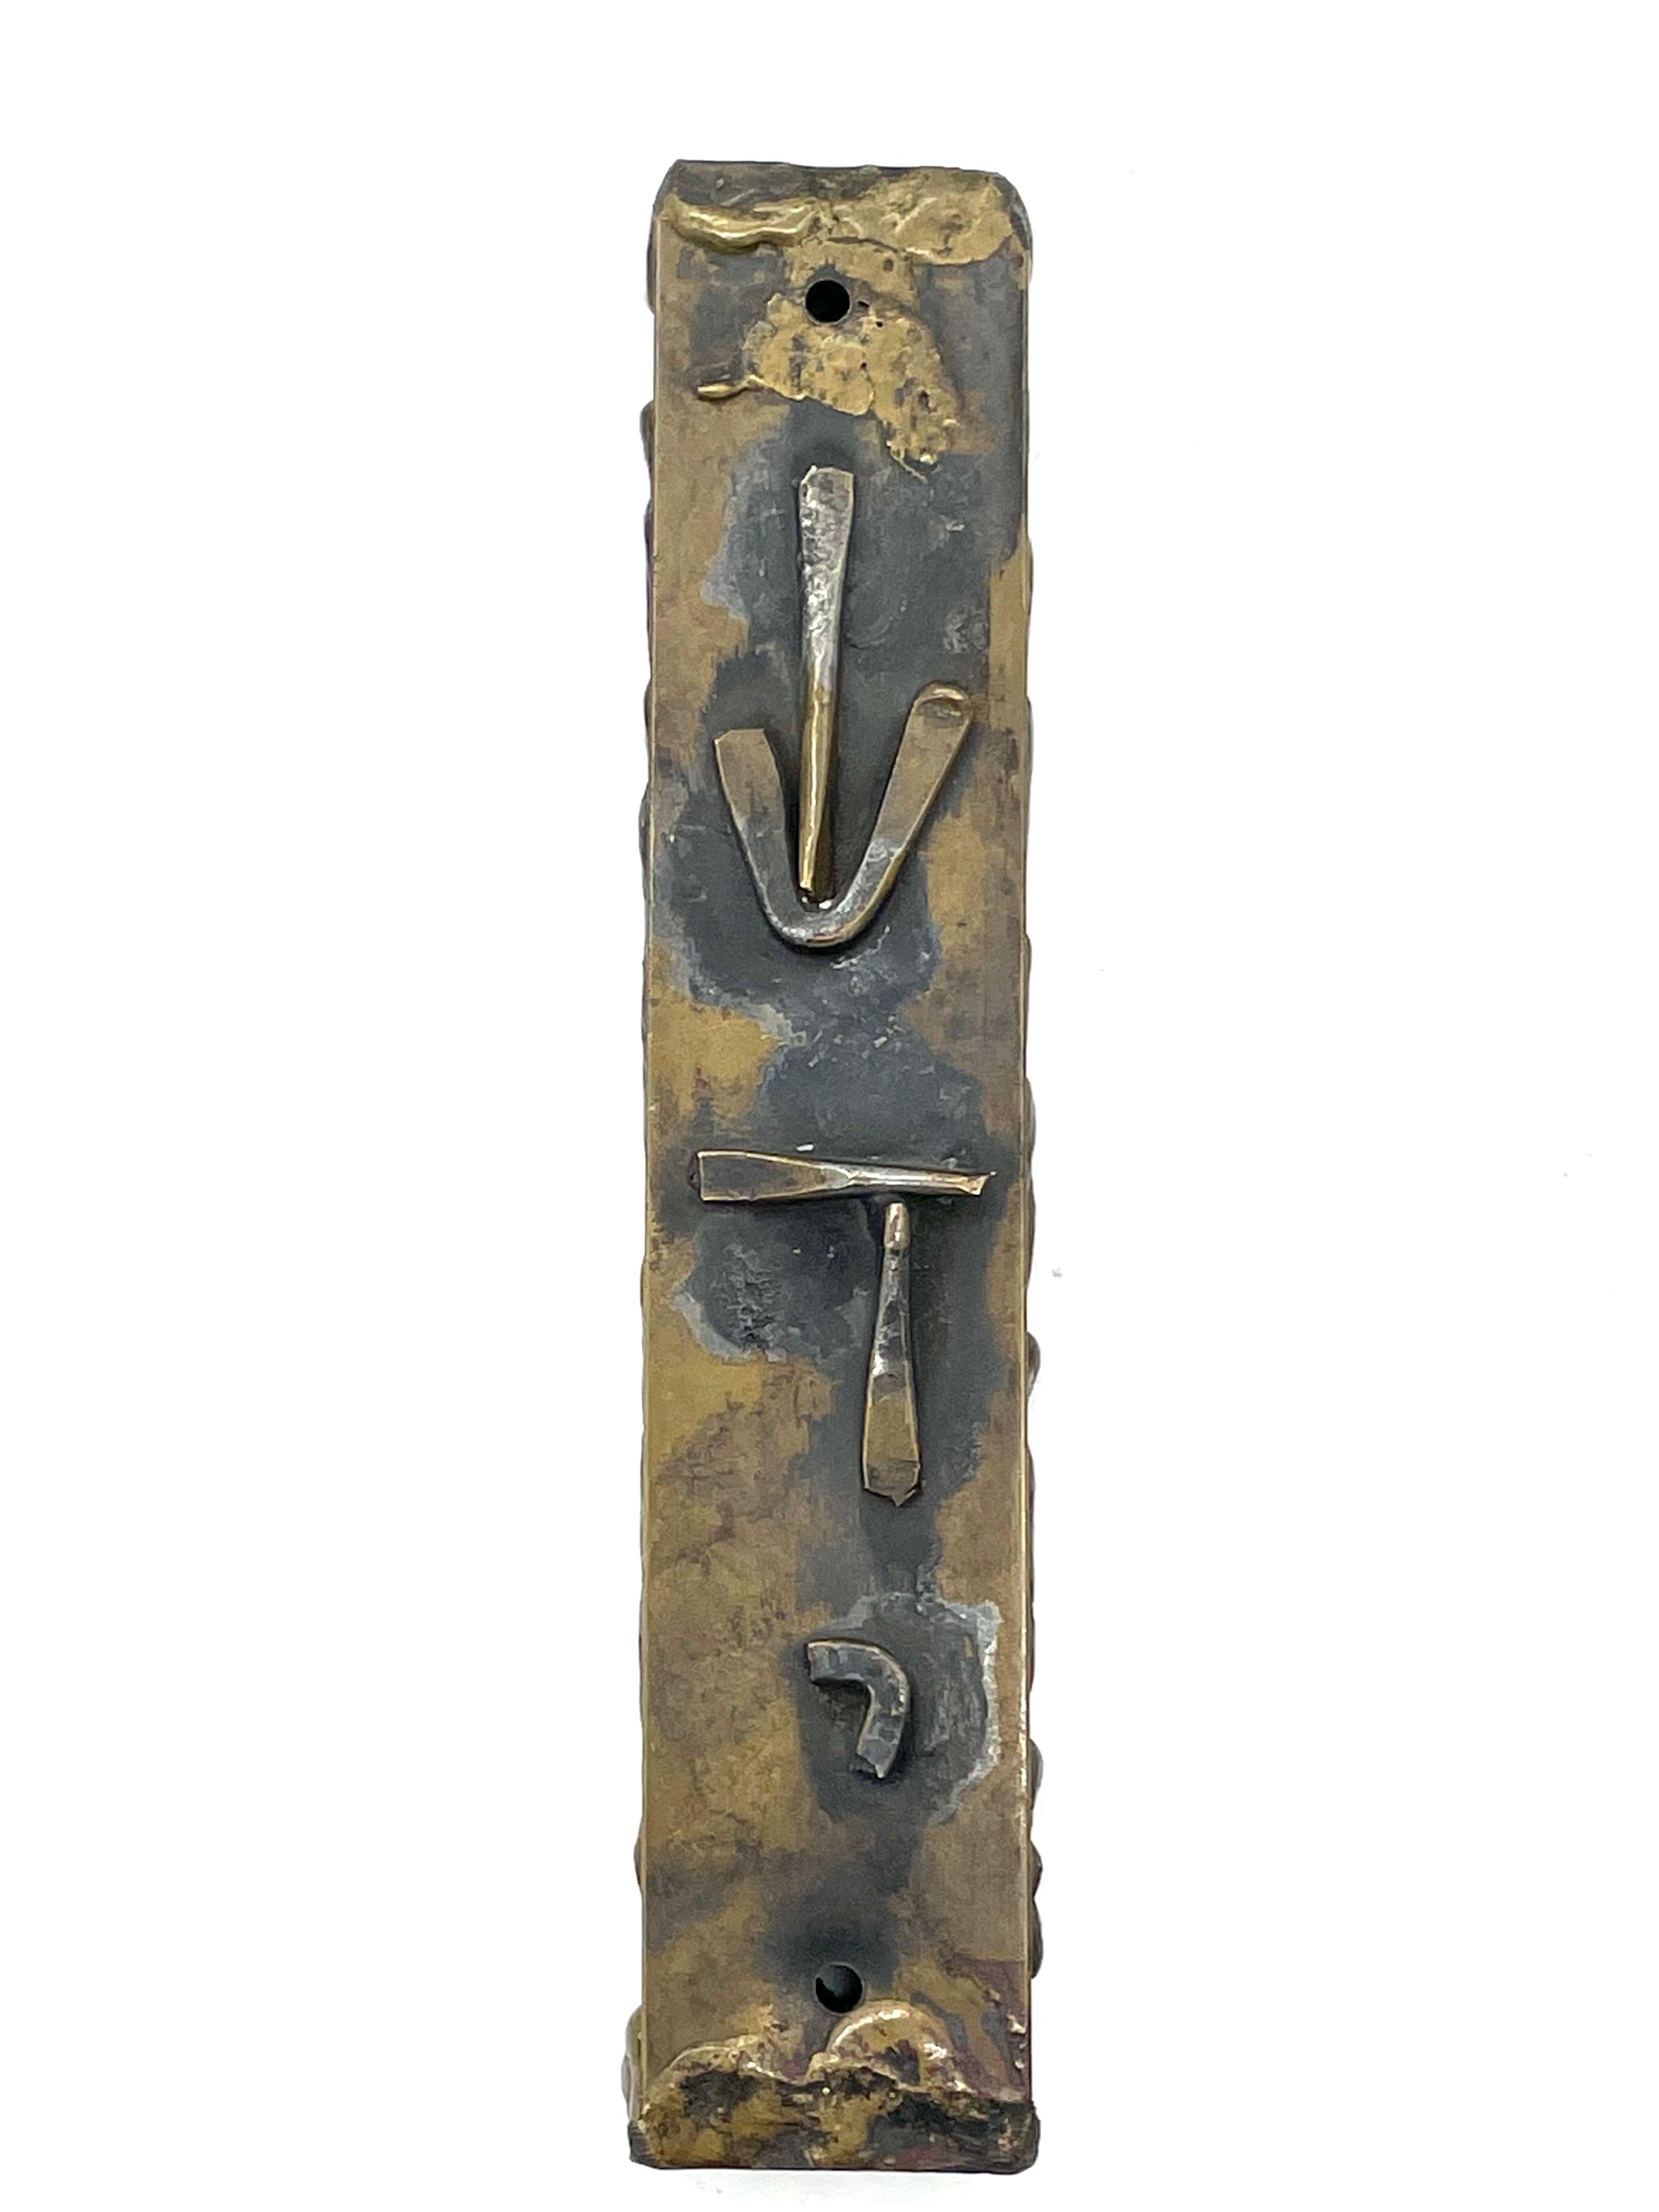 A mid-20th century brutalist brass Mezuzah case created by the Israeli artist David Palombo. The Mezuzah case is shaped in the form of rectangular box. The word 